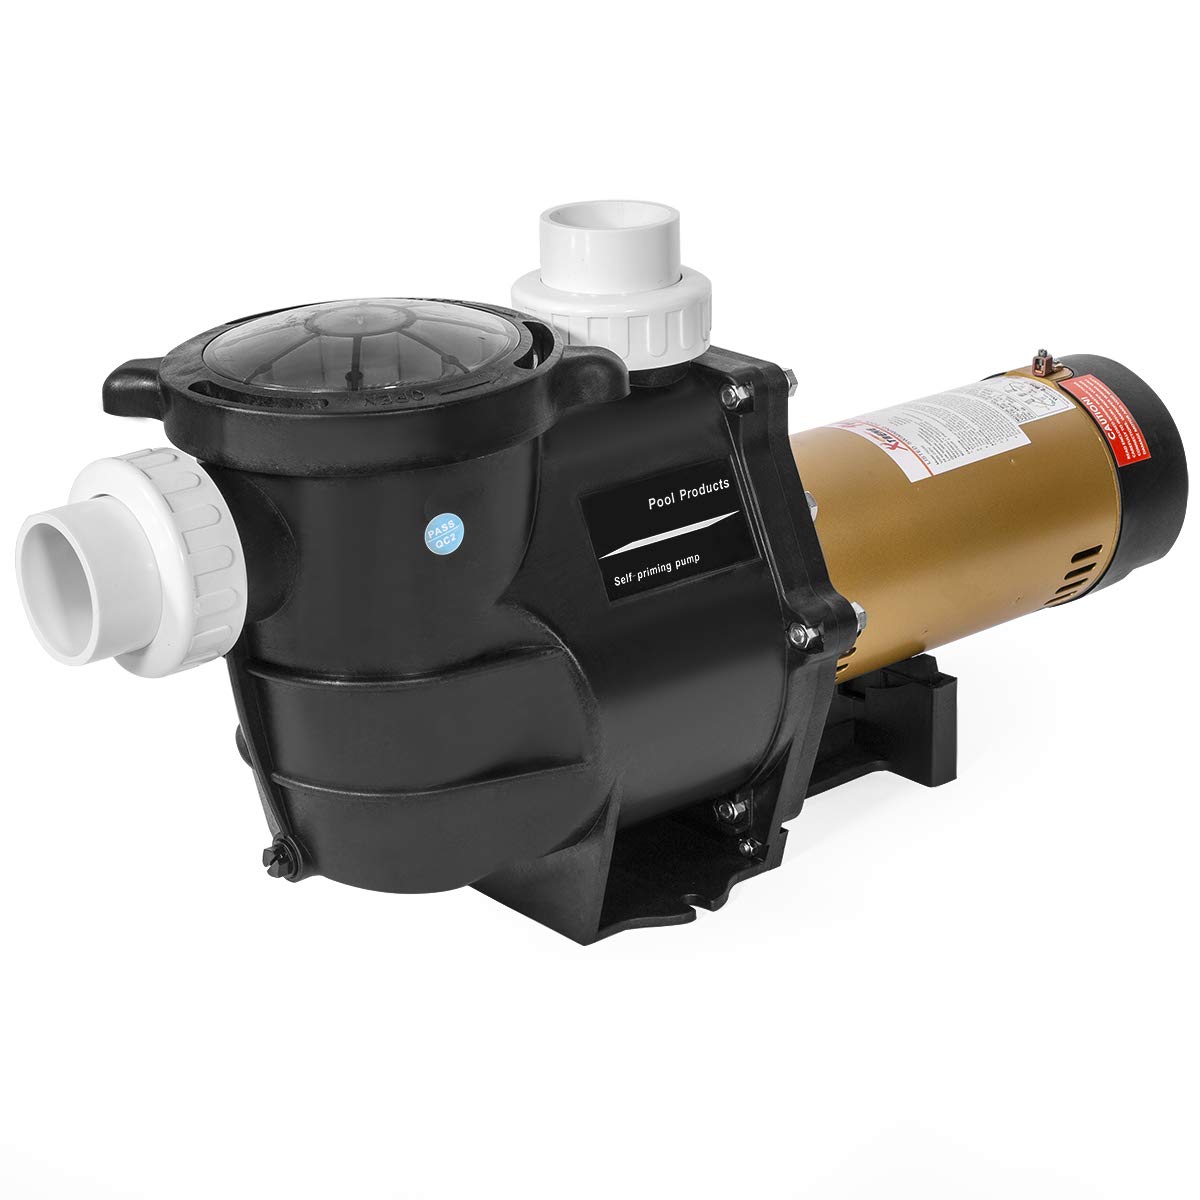 XtremepowerUS 2HP In-Ground Swimming Pool Pump Variable Speed 2" Inlet 230V High Flo w/ Slip-On Fitting